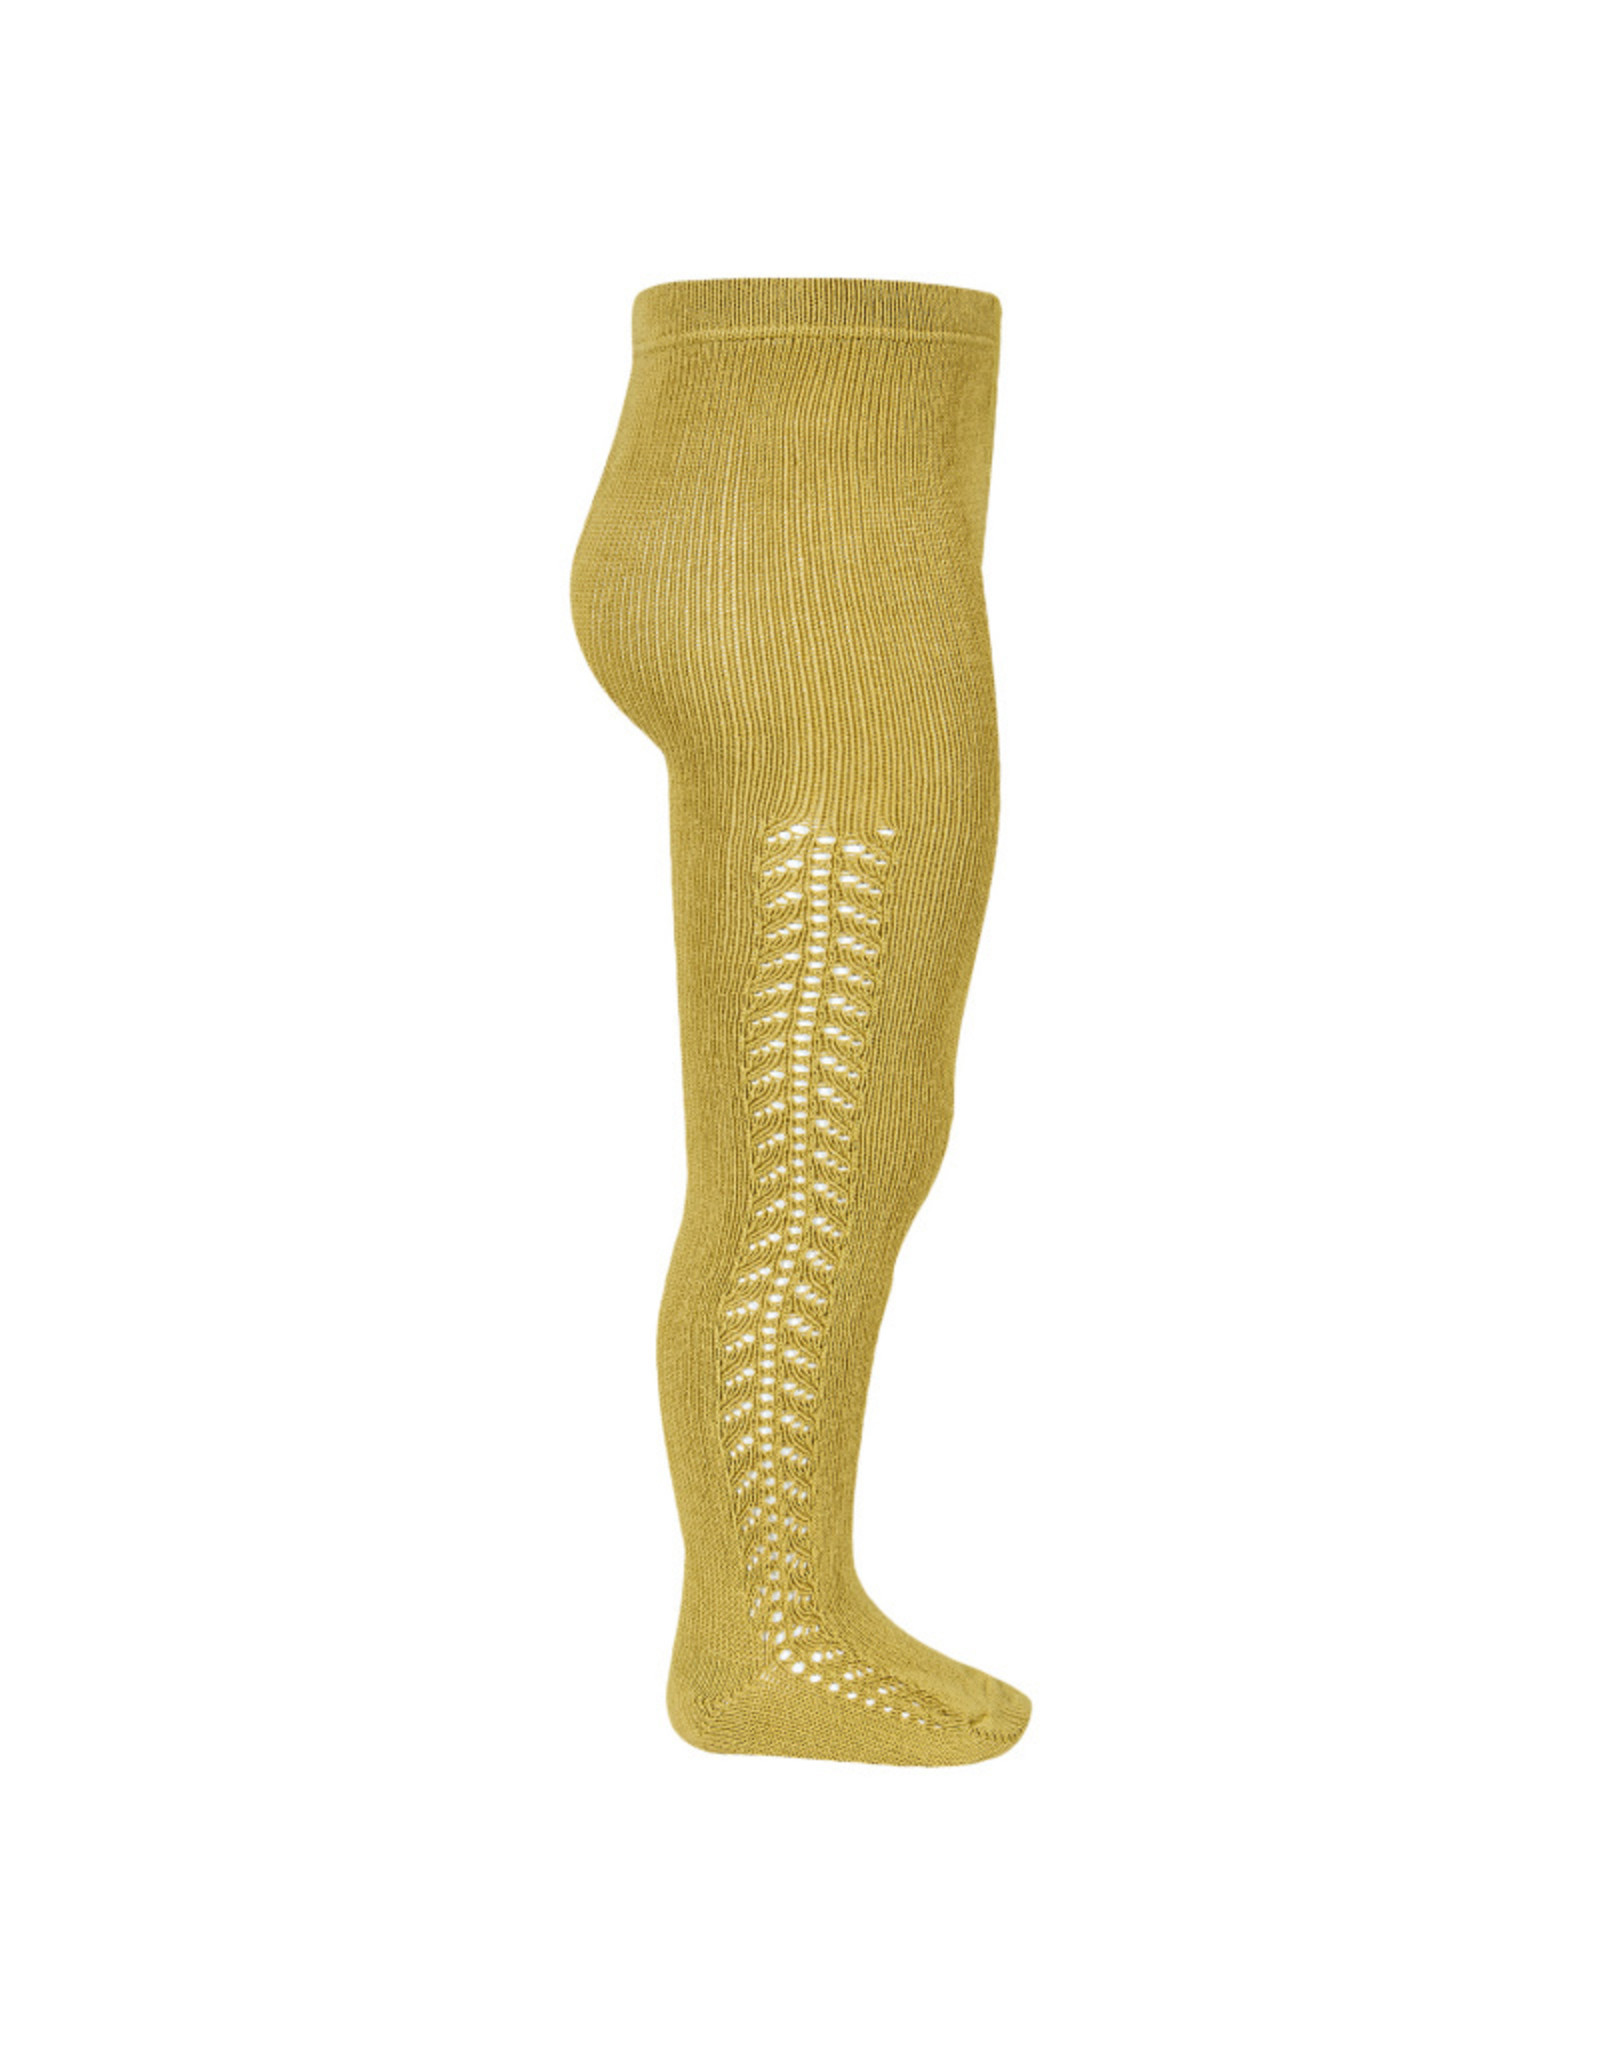 CONDOR Yellow Rib Tights - Devoted Touch